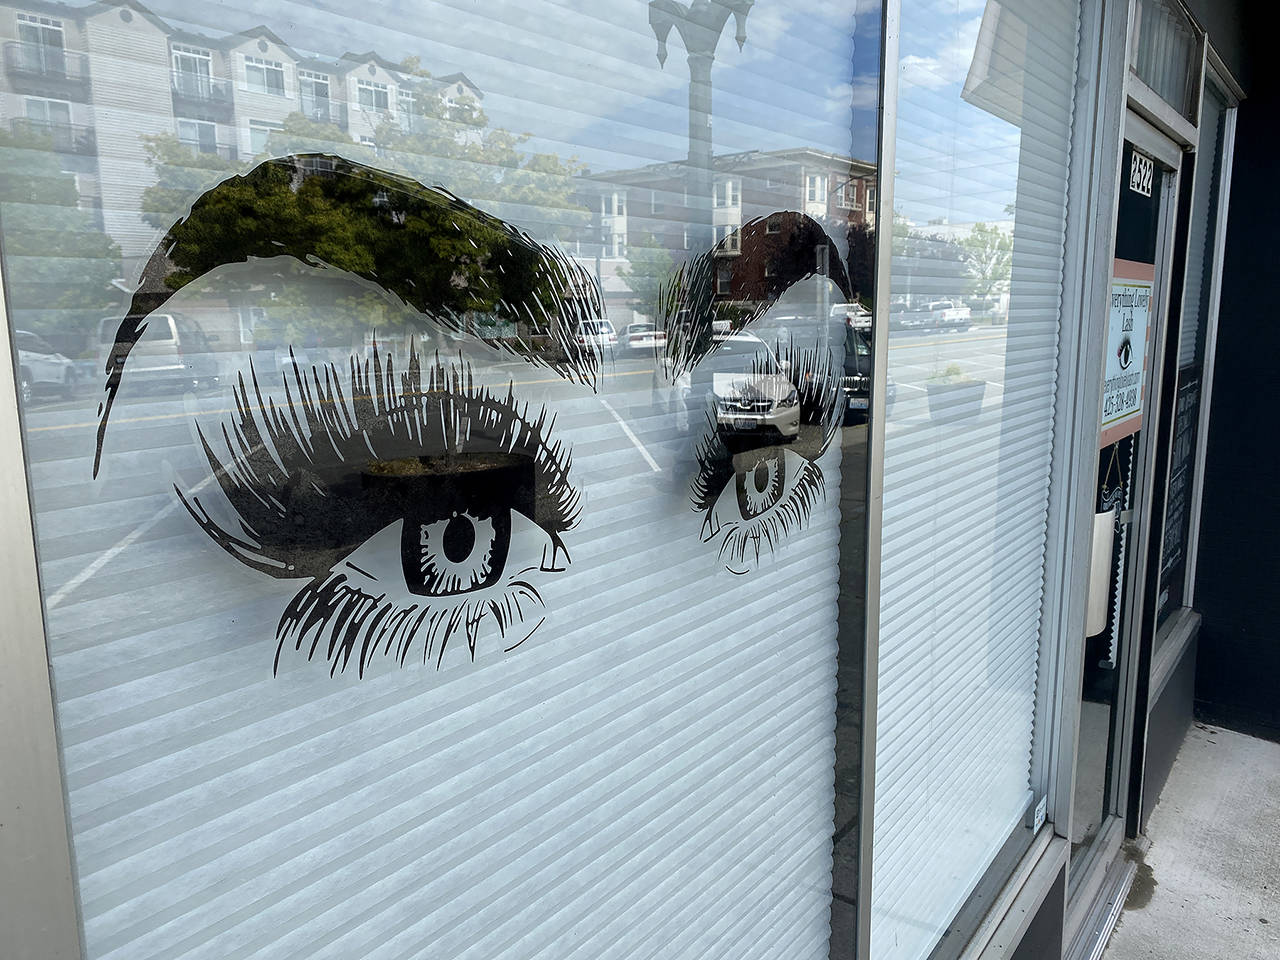 Everything Lovely Lash on Colby in Everett can join other salons as well as barbers and restaurants in reopening under Phase 2. (Sue Misao / The Herald)